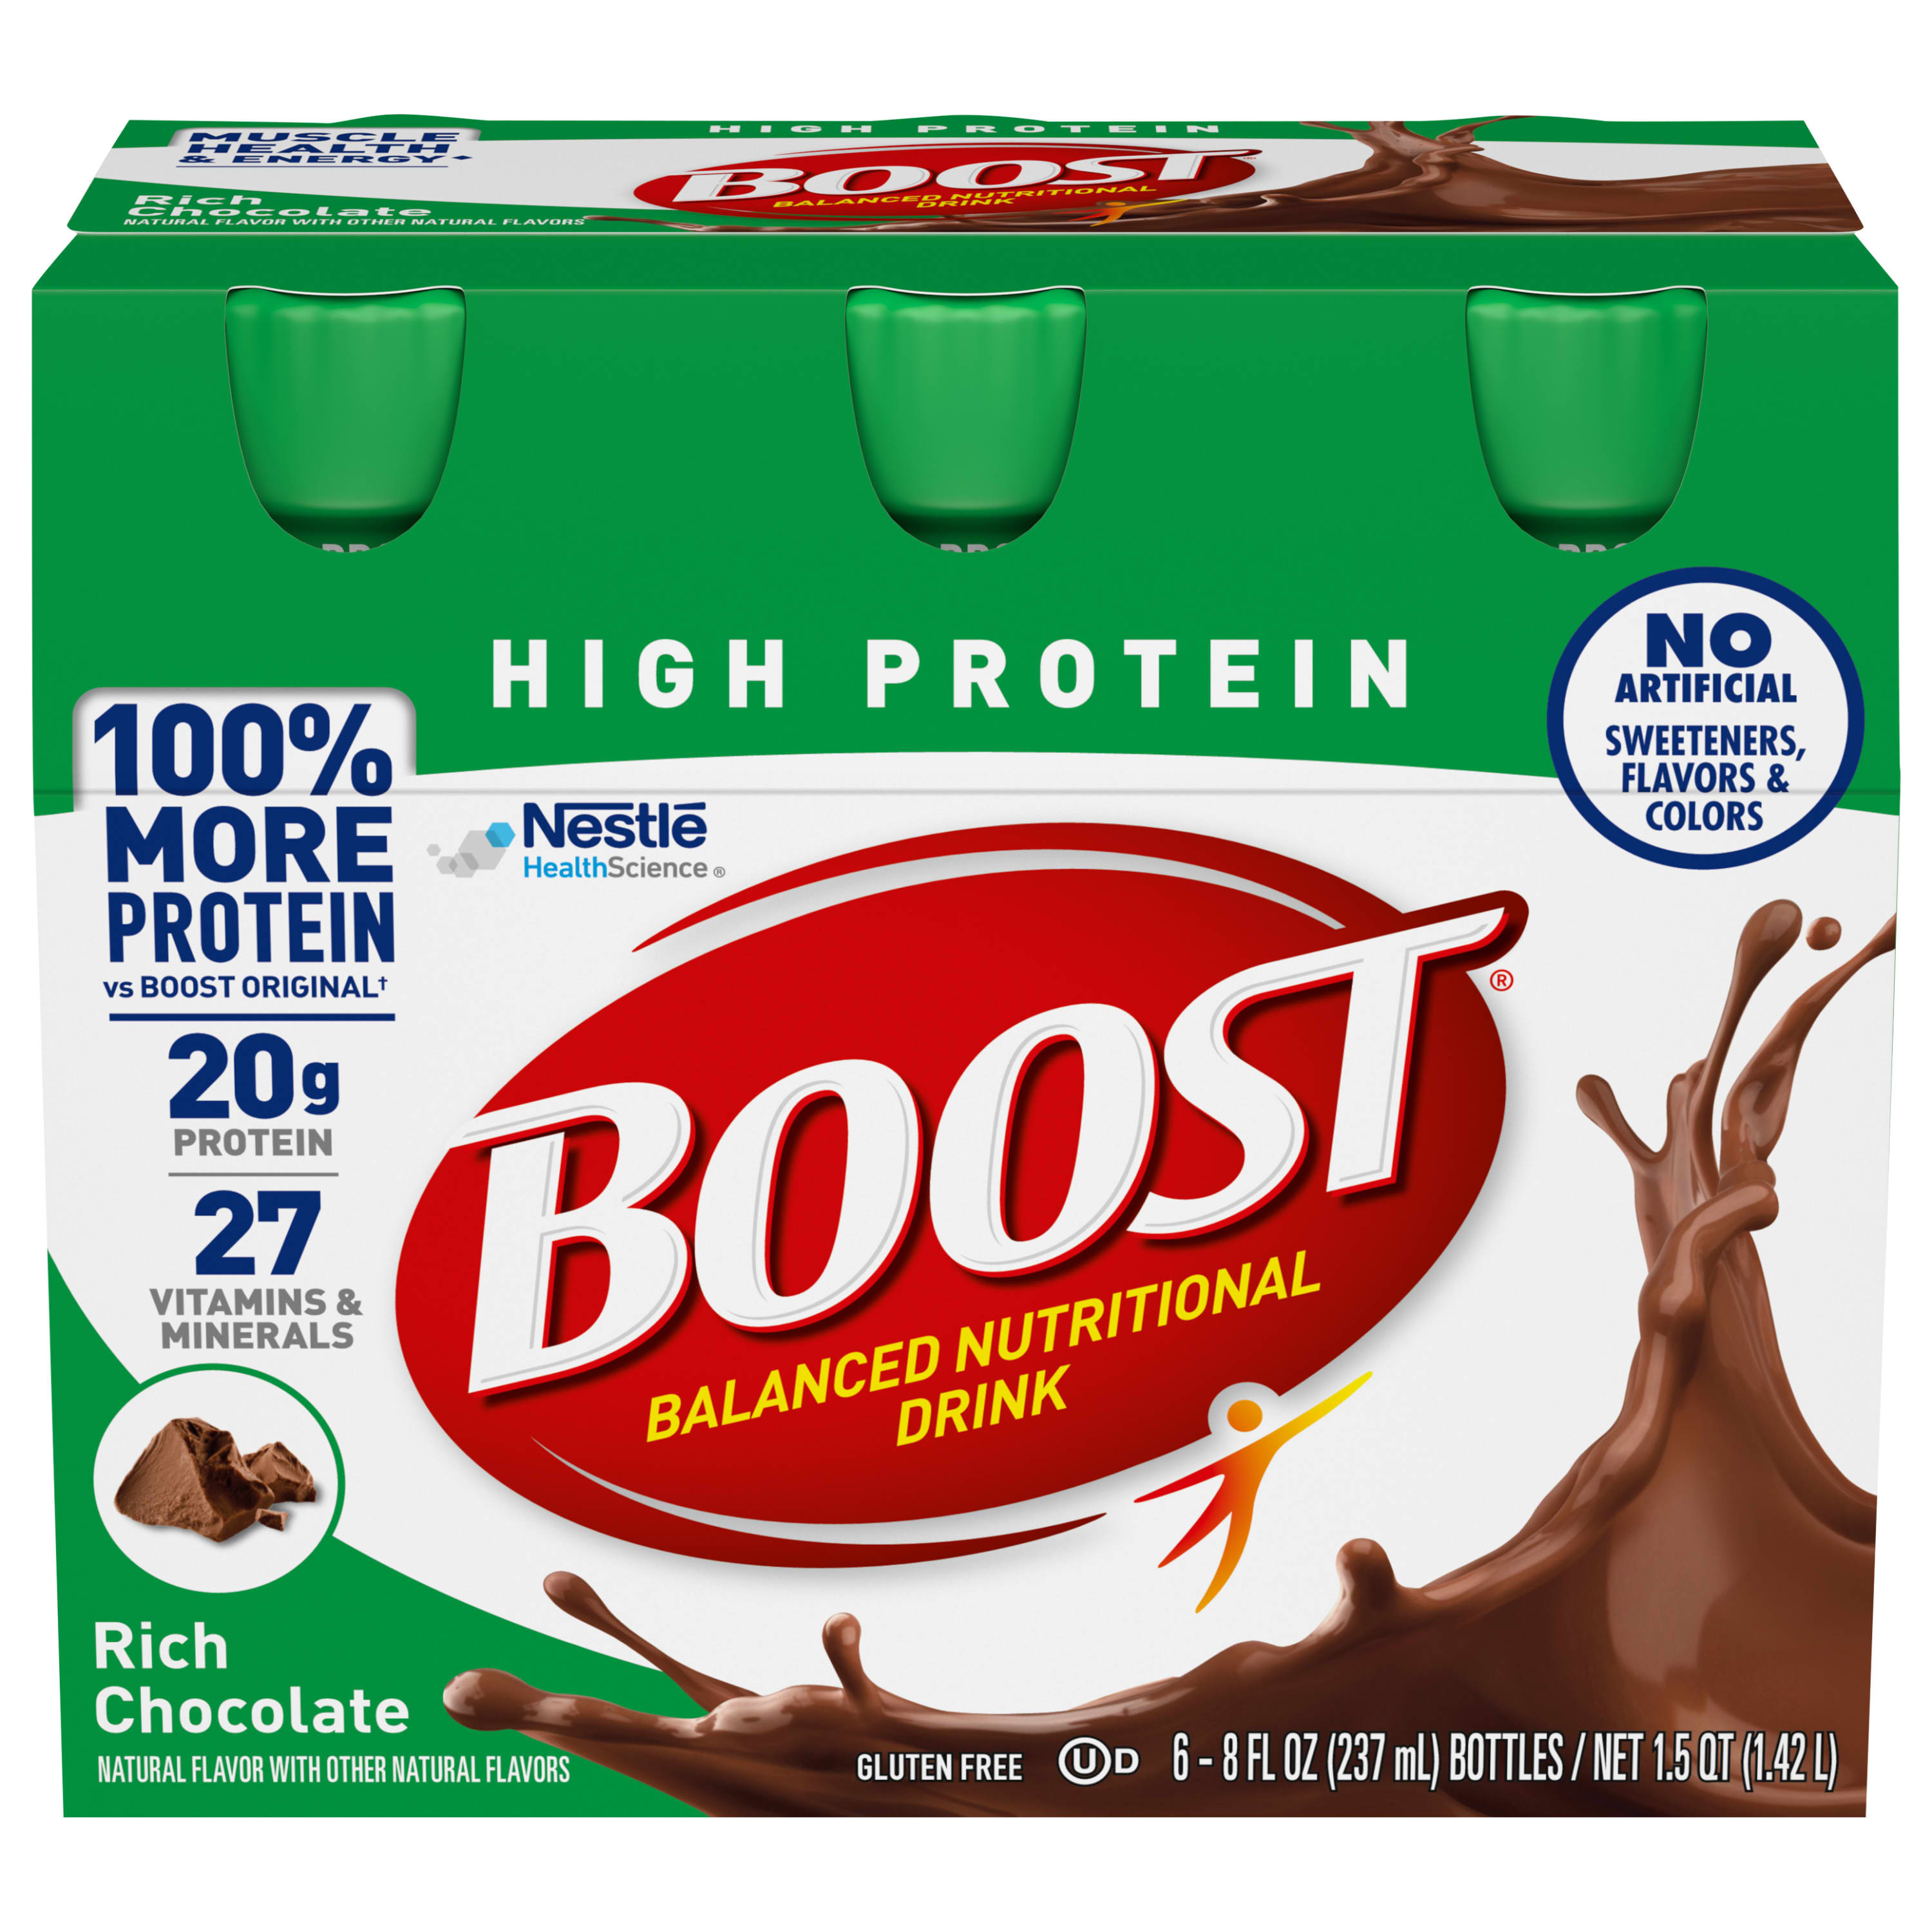 BOOST High Protein Nutritional Drink, Rich Chocolate, 20 g Protein , 6 - 8 fl oz Bottles - image 3 of 11